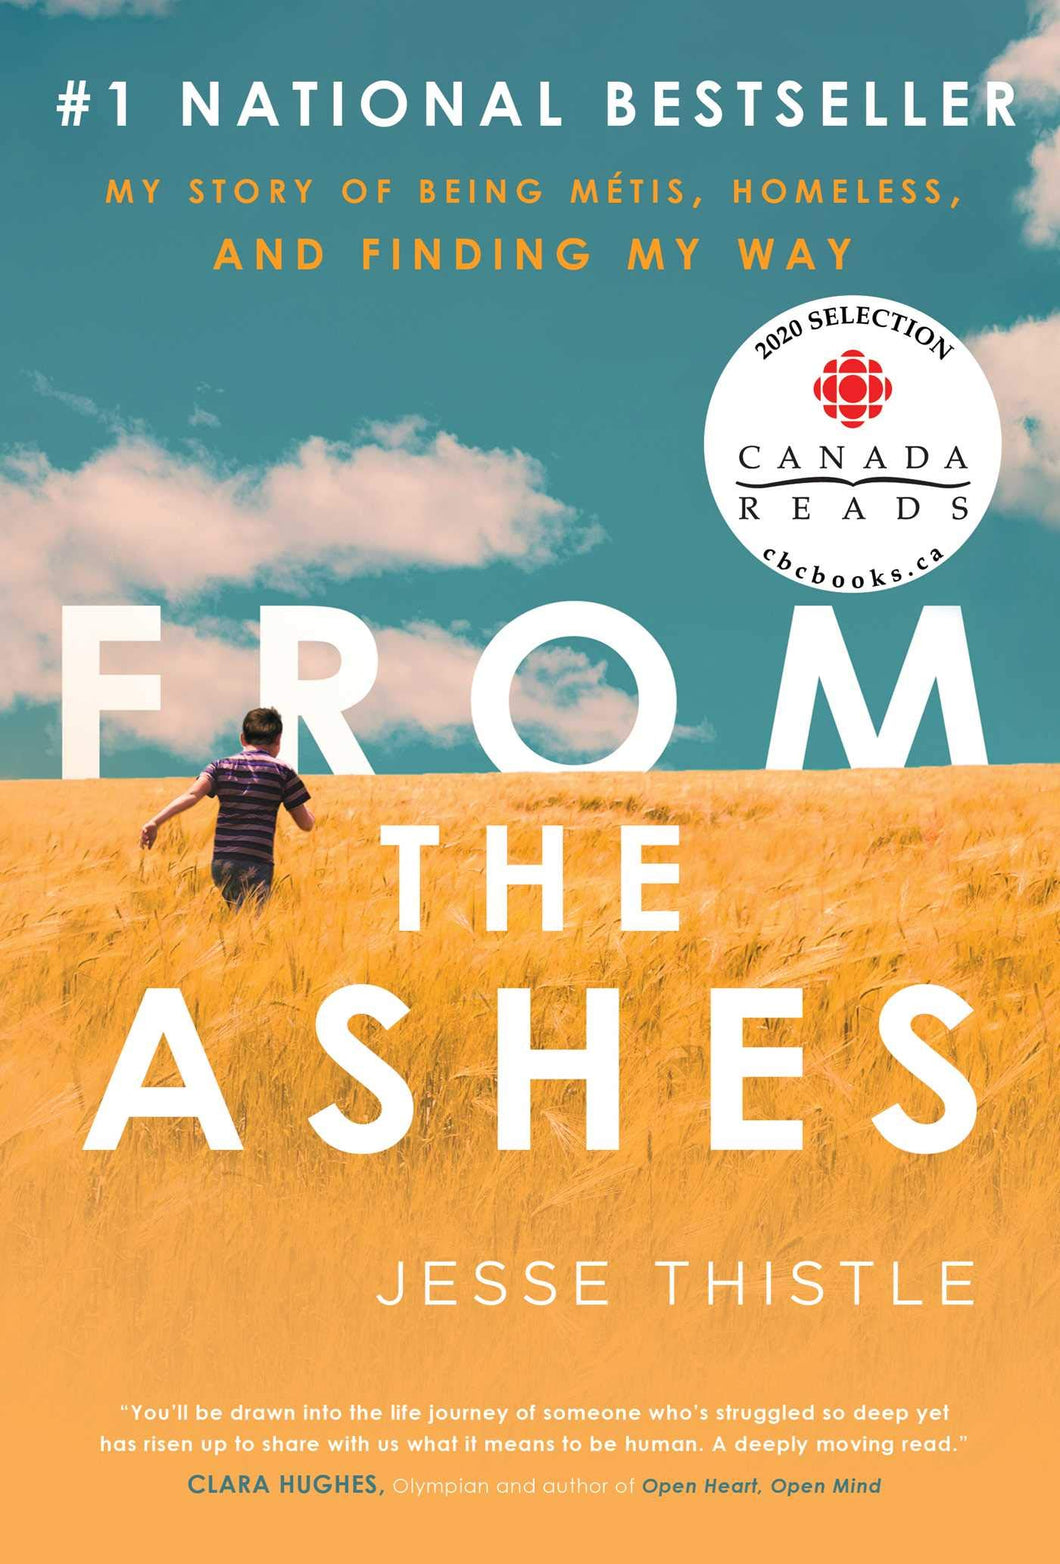 From The Ashes [Jesse Thistle]